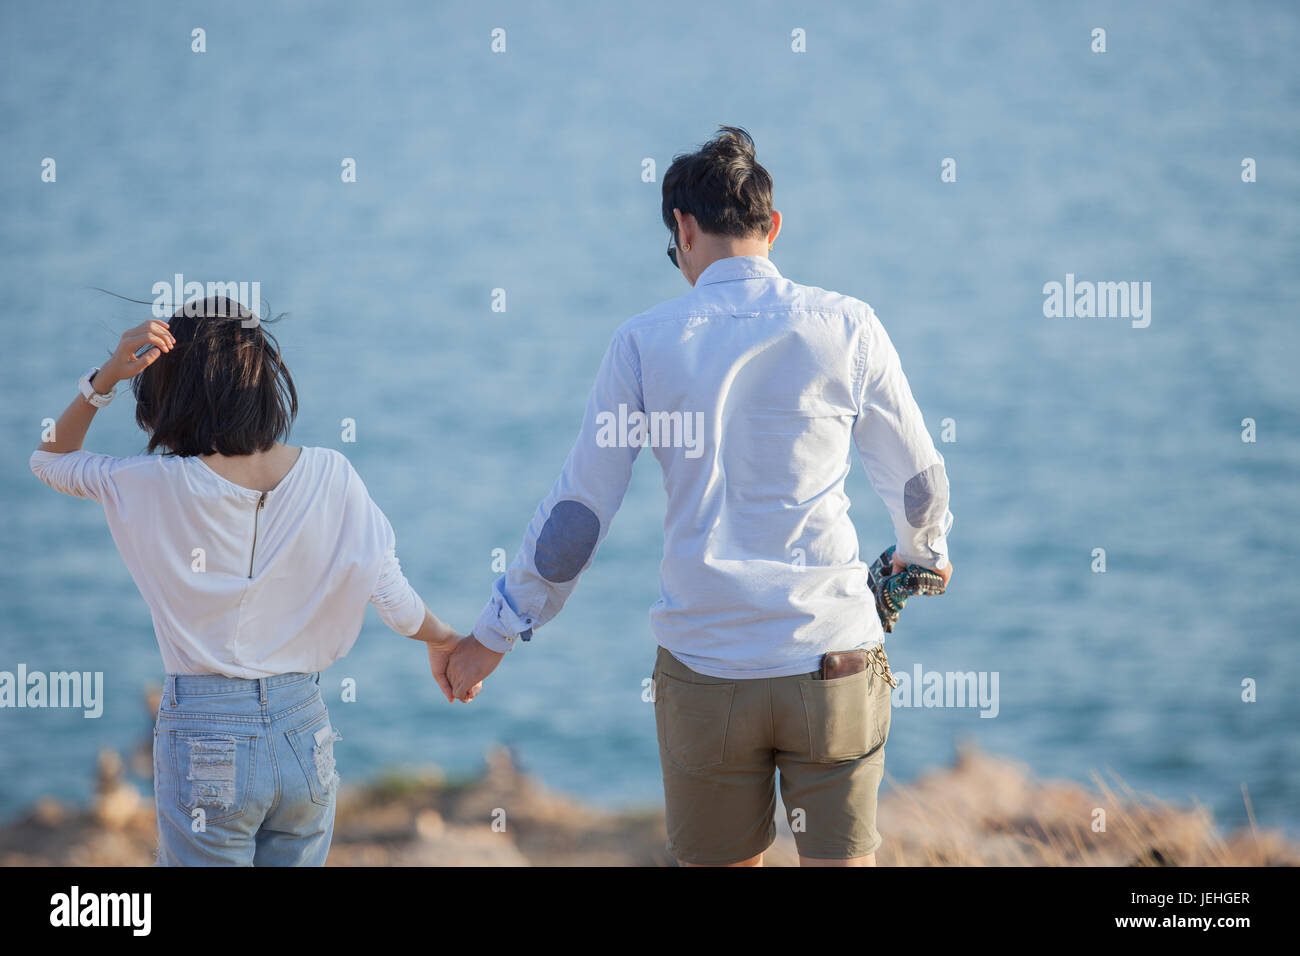 couples of younger man and woman in love relaxing vacation outdoor lifestyle Stock Photo